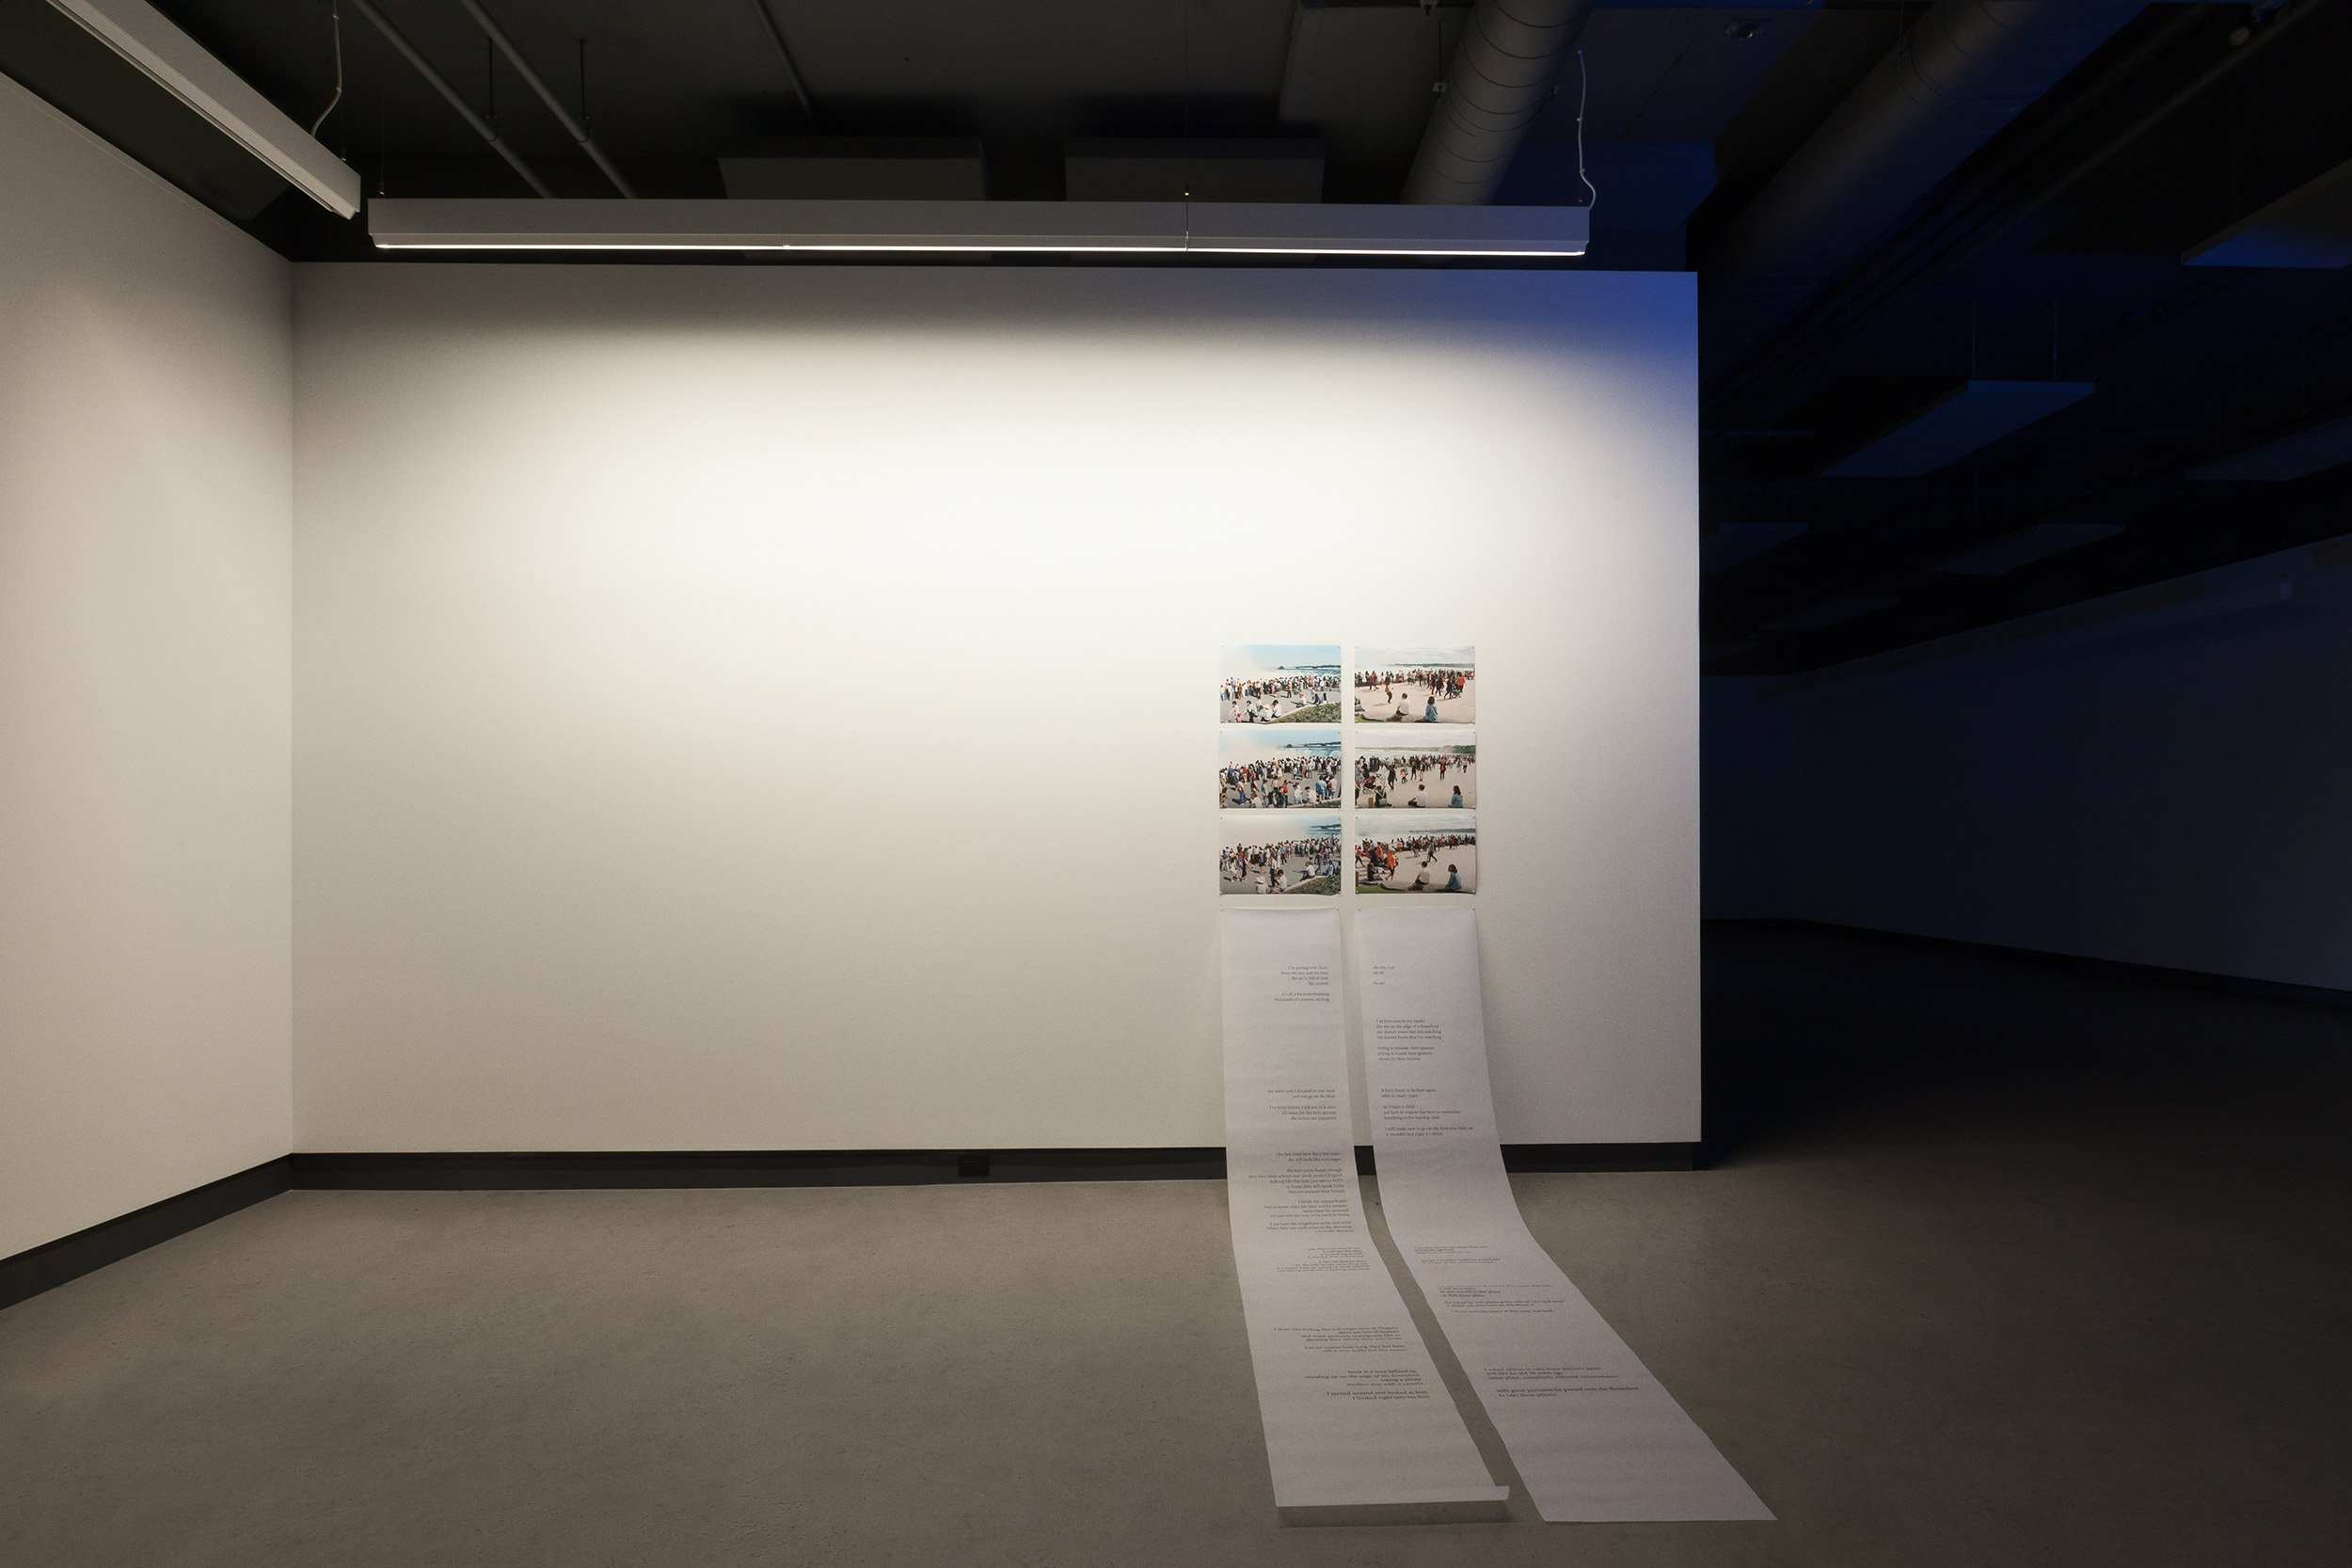  © Zinnia Naqvi,  I’m getting a bit dizzy from the sun and the heat (Another desi with a camera)  (2019) de la série  Yours to Discover  (2019). Vue d'installation de l'exposition  the Translation is Approximate , Dazibao, 2021. Photo : Marilou Crisp